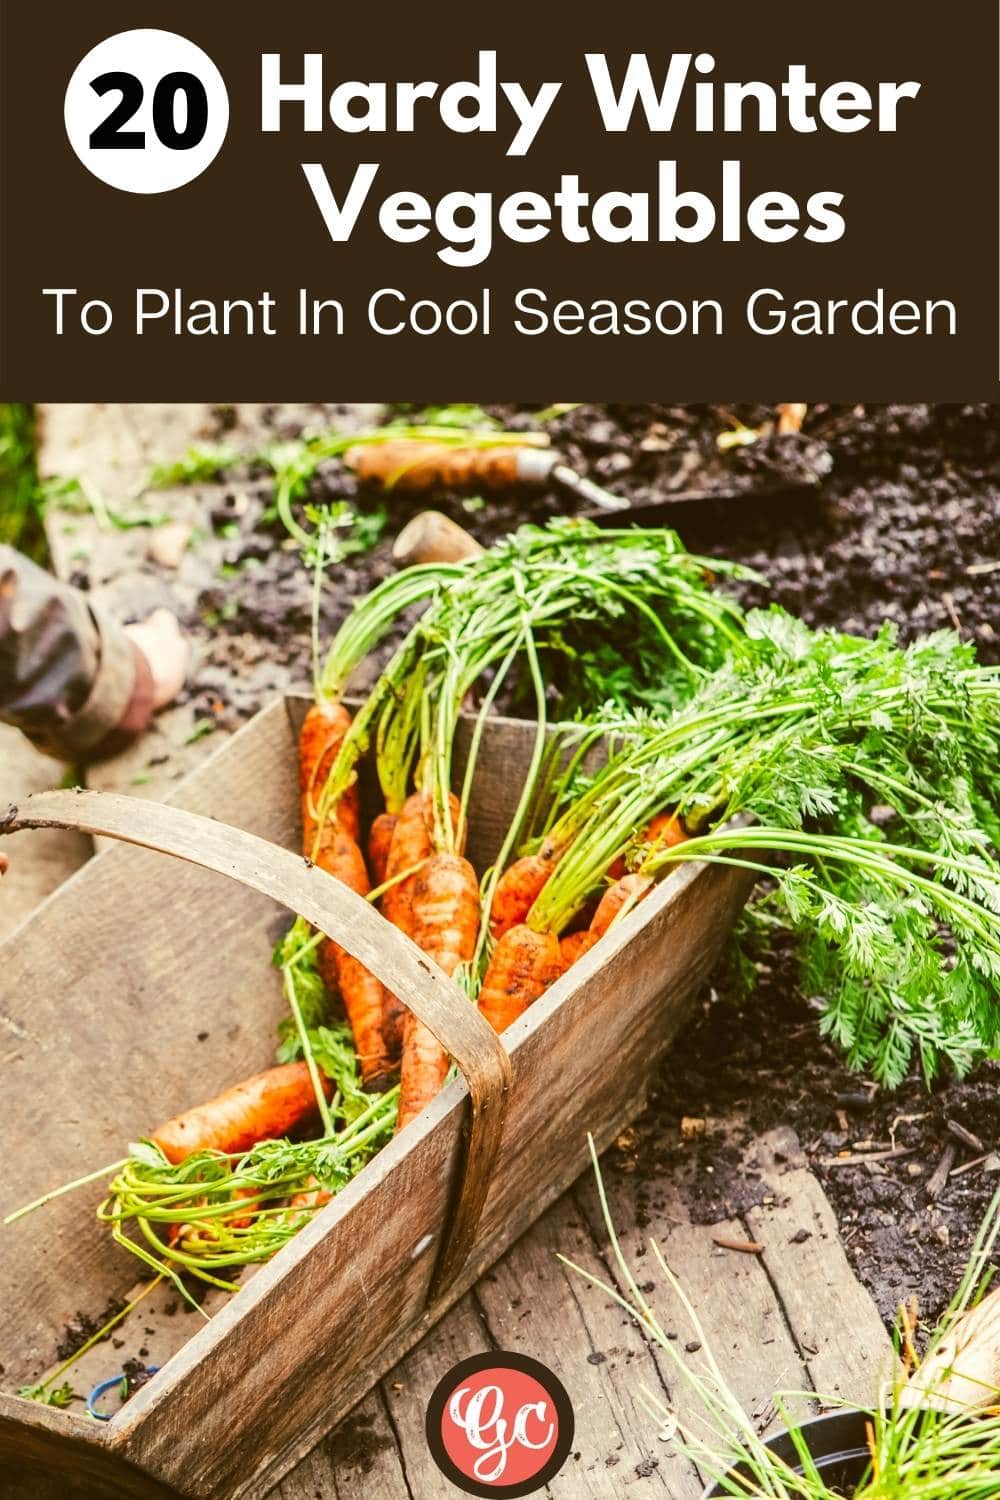 Winter Vegetables To Plant And Harvest In Cool Season Garden